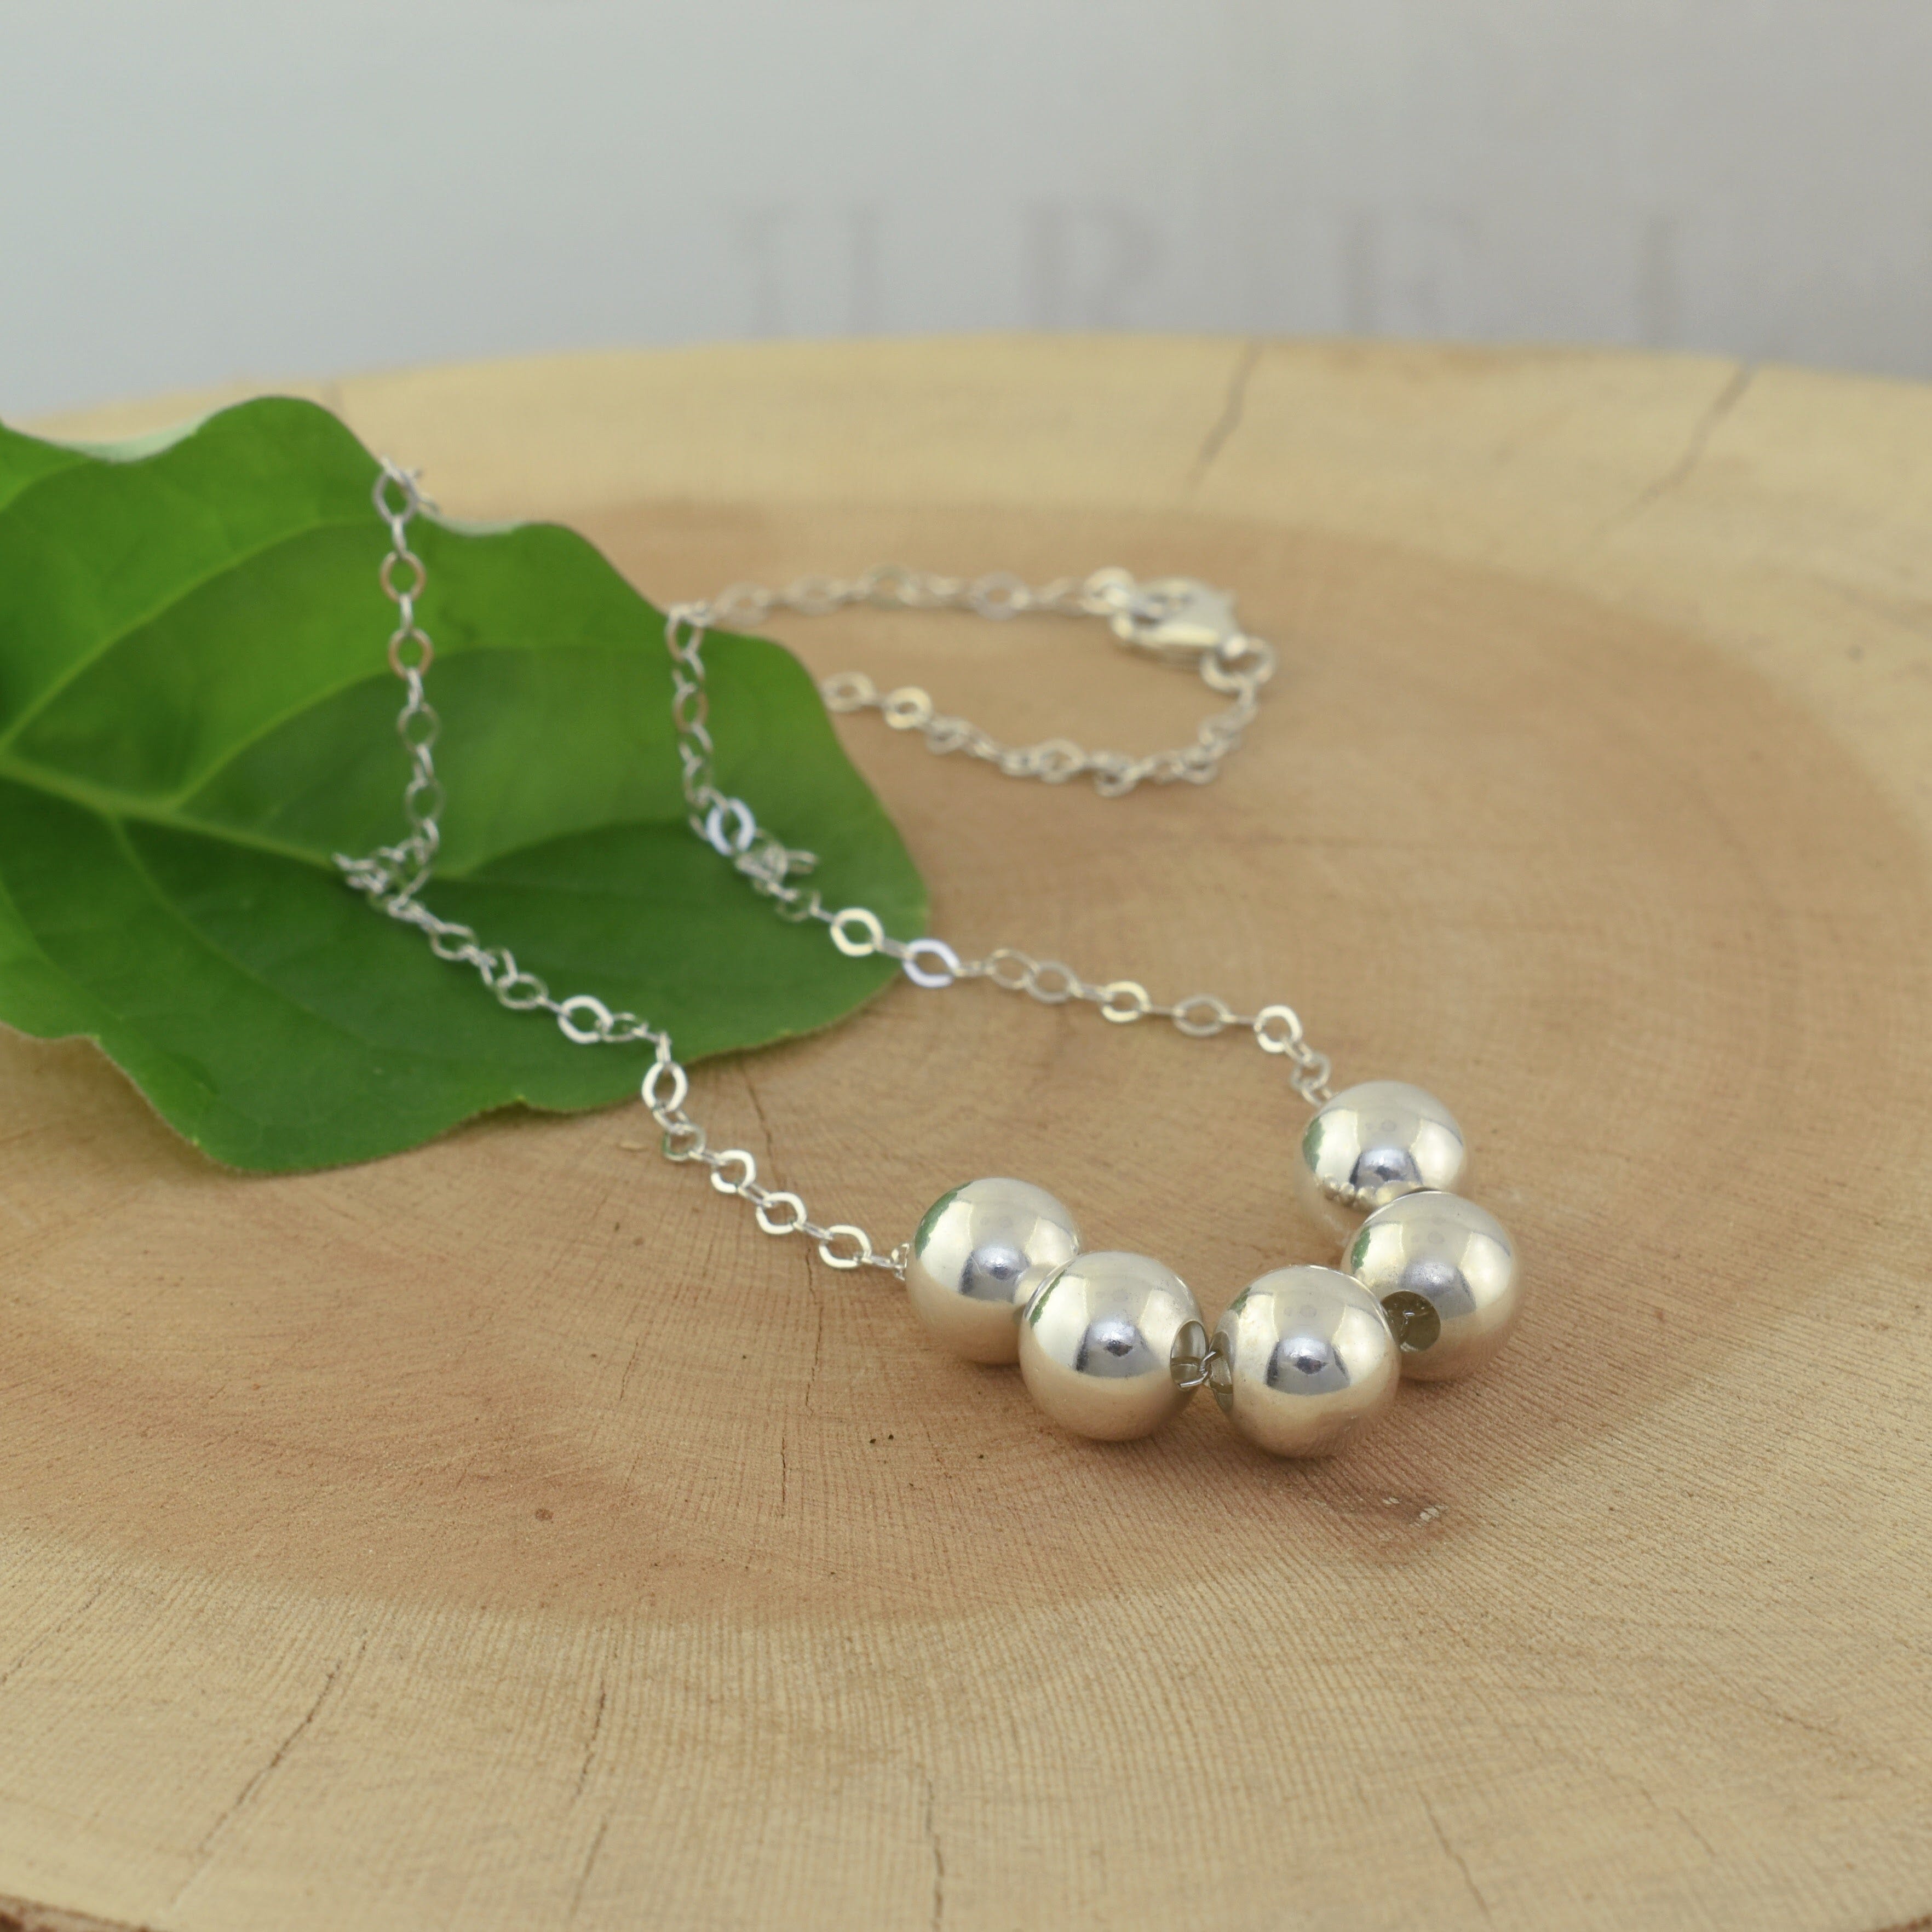 .925 sterling silver beads necklace